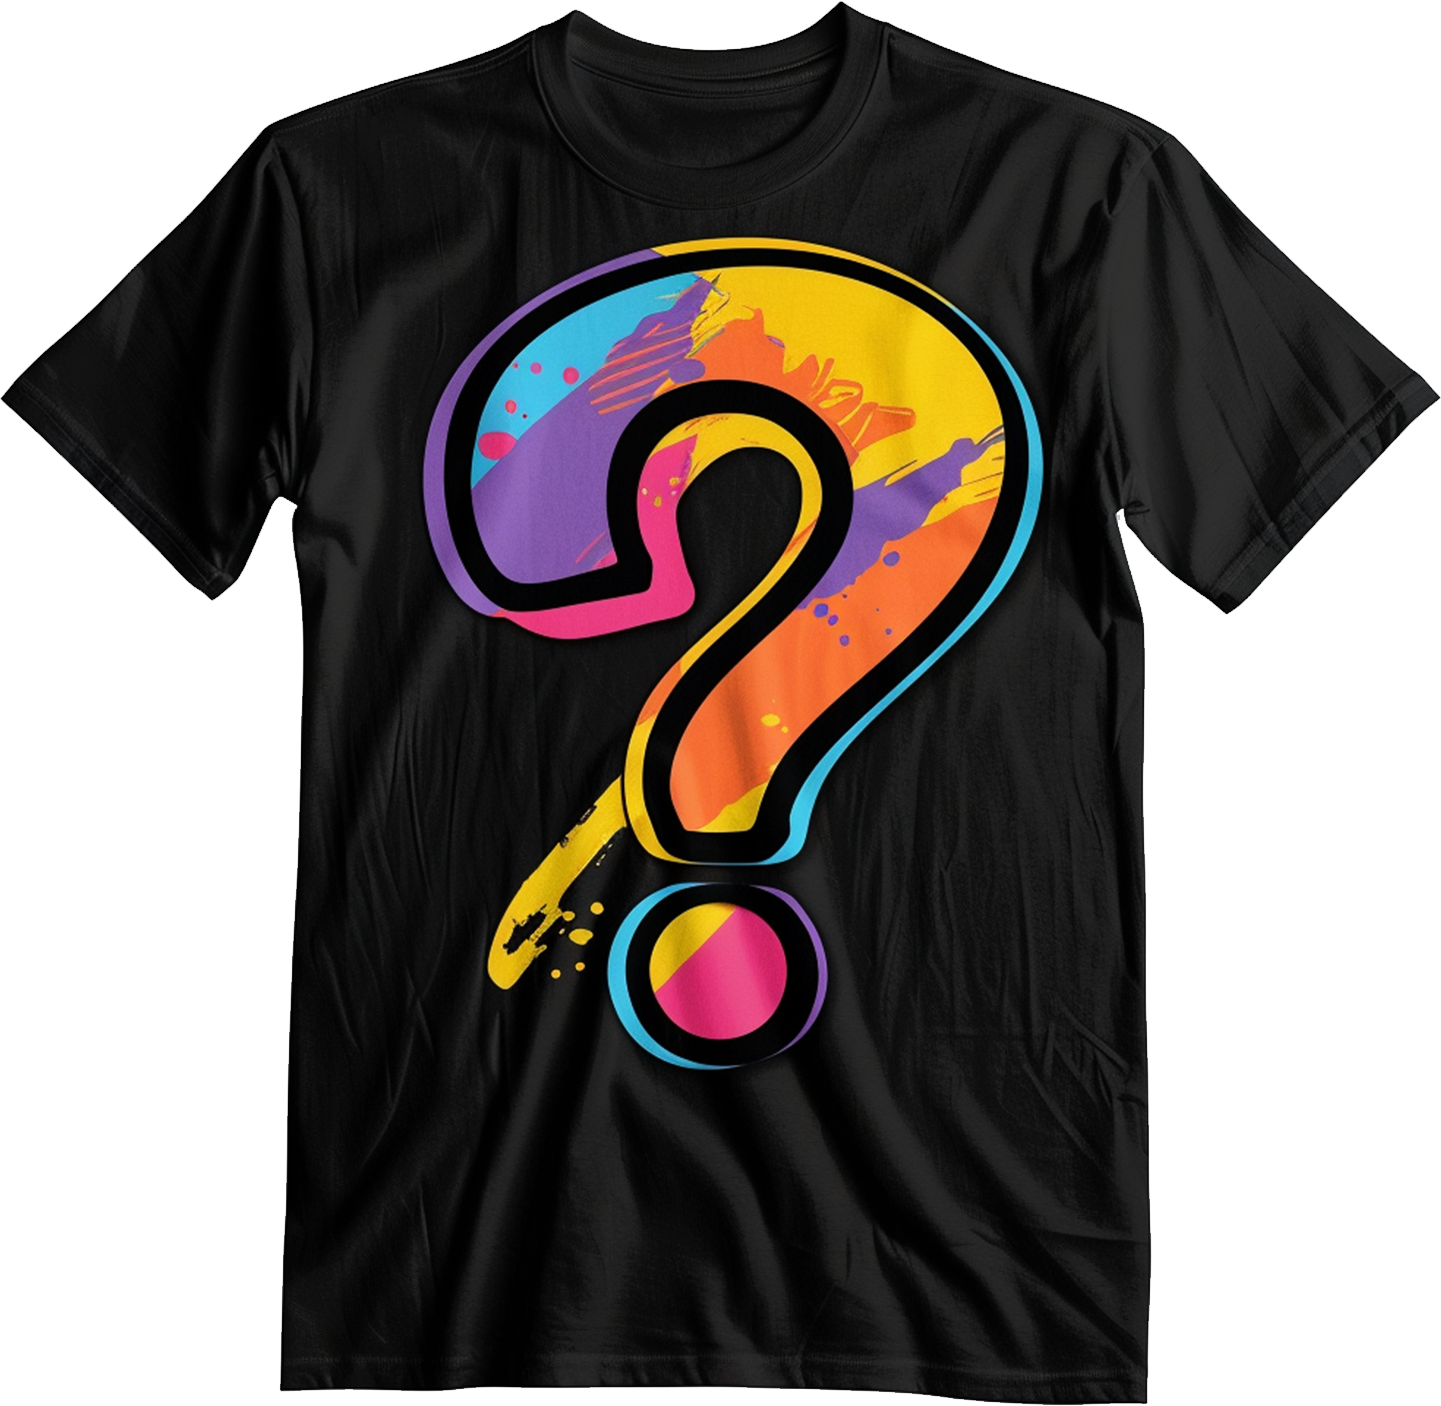 Shirt with a bright ink question mark printed on front, ai image